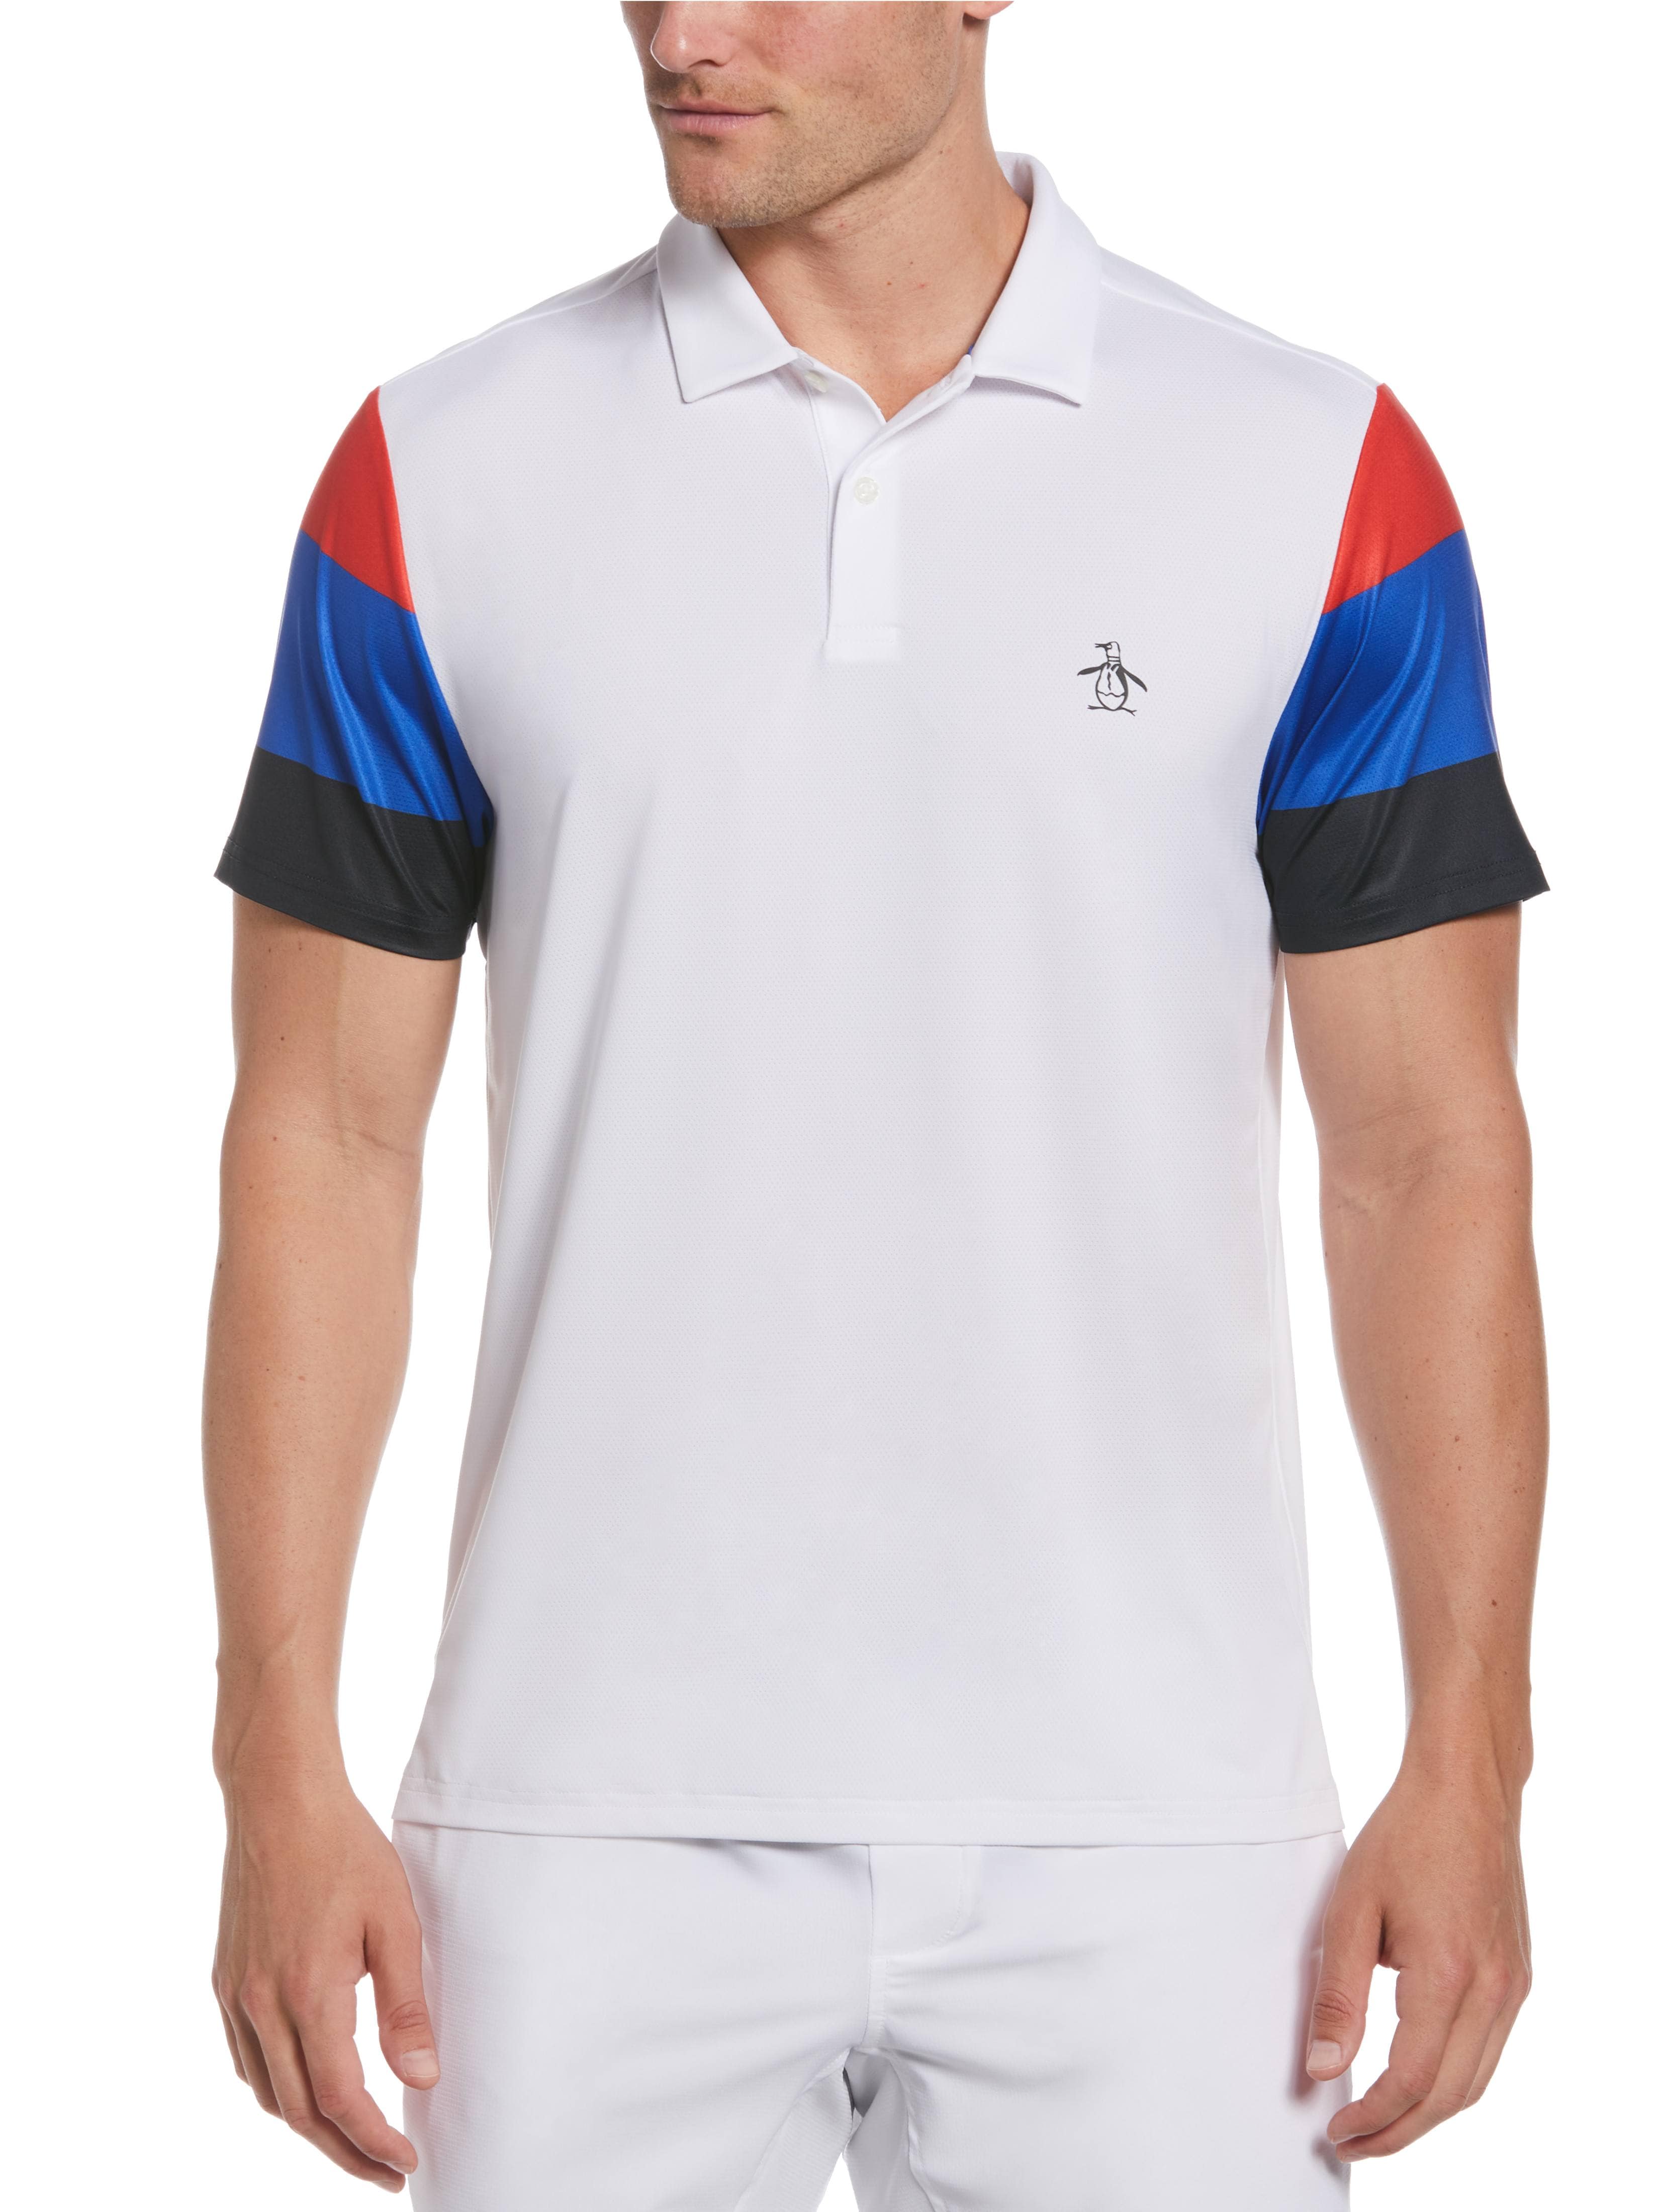 Original Penguin Mens Performance Color Block Polo Shirt, Size Small, White, Polyester/Recycled Polyester/Elastane | Golf Apparel Shop